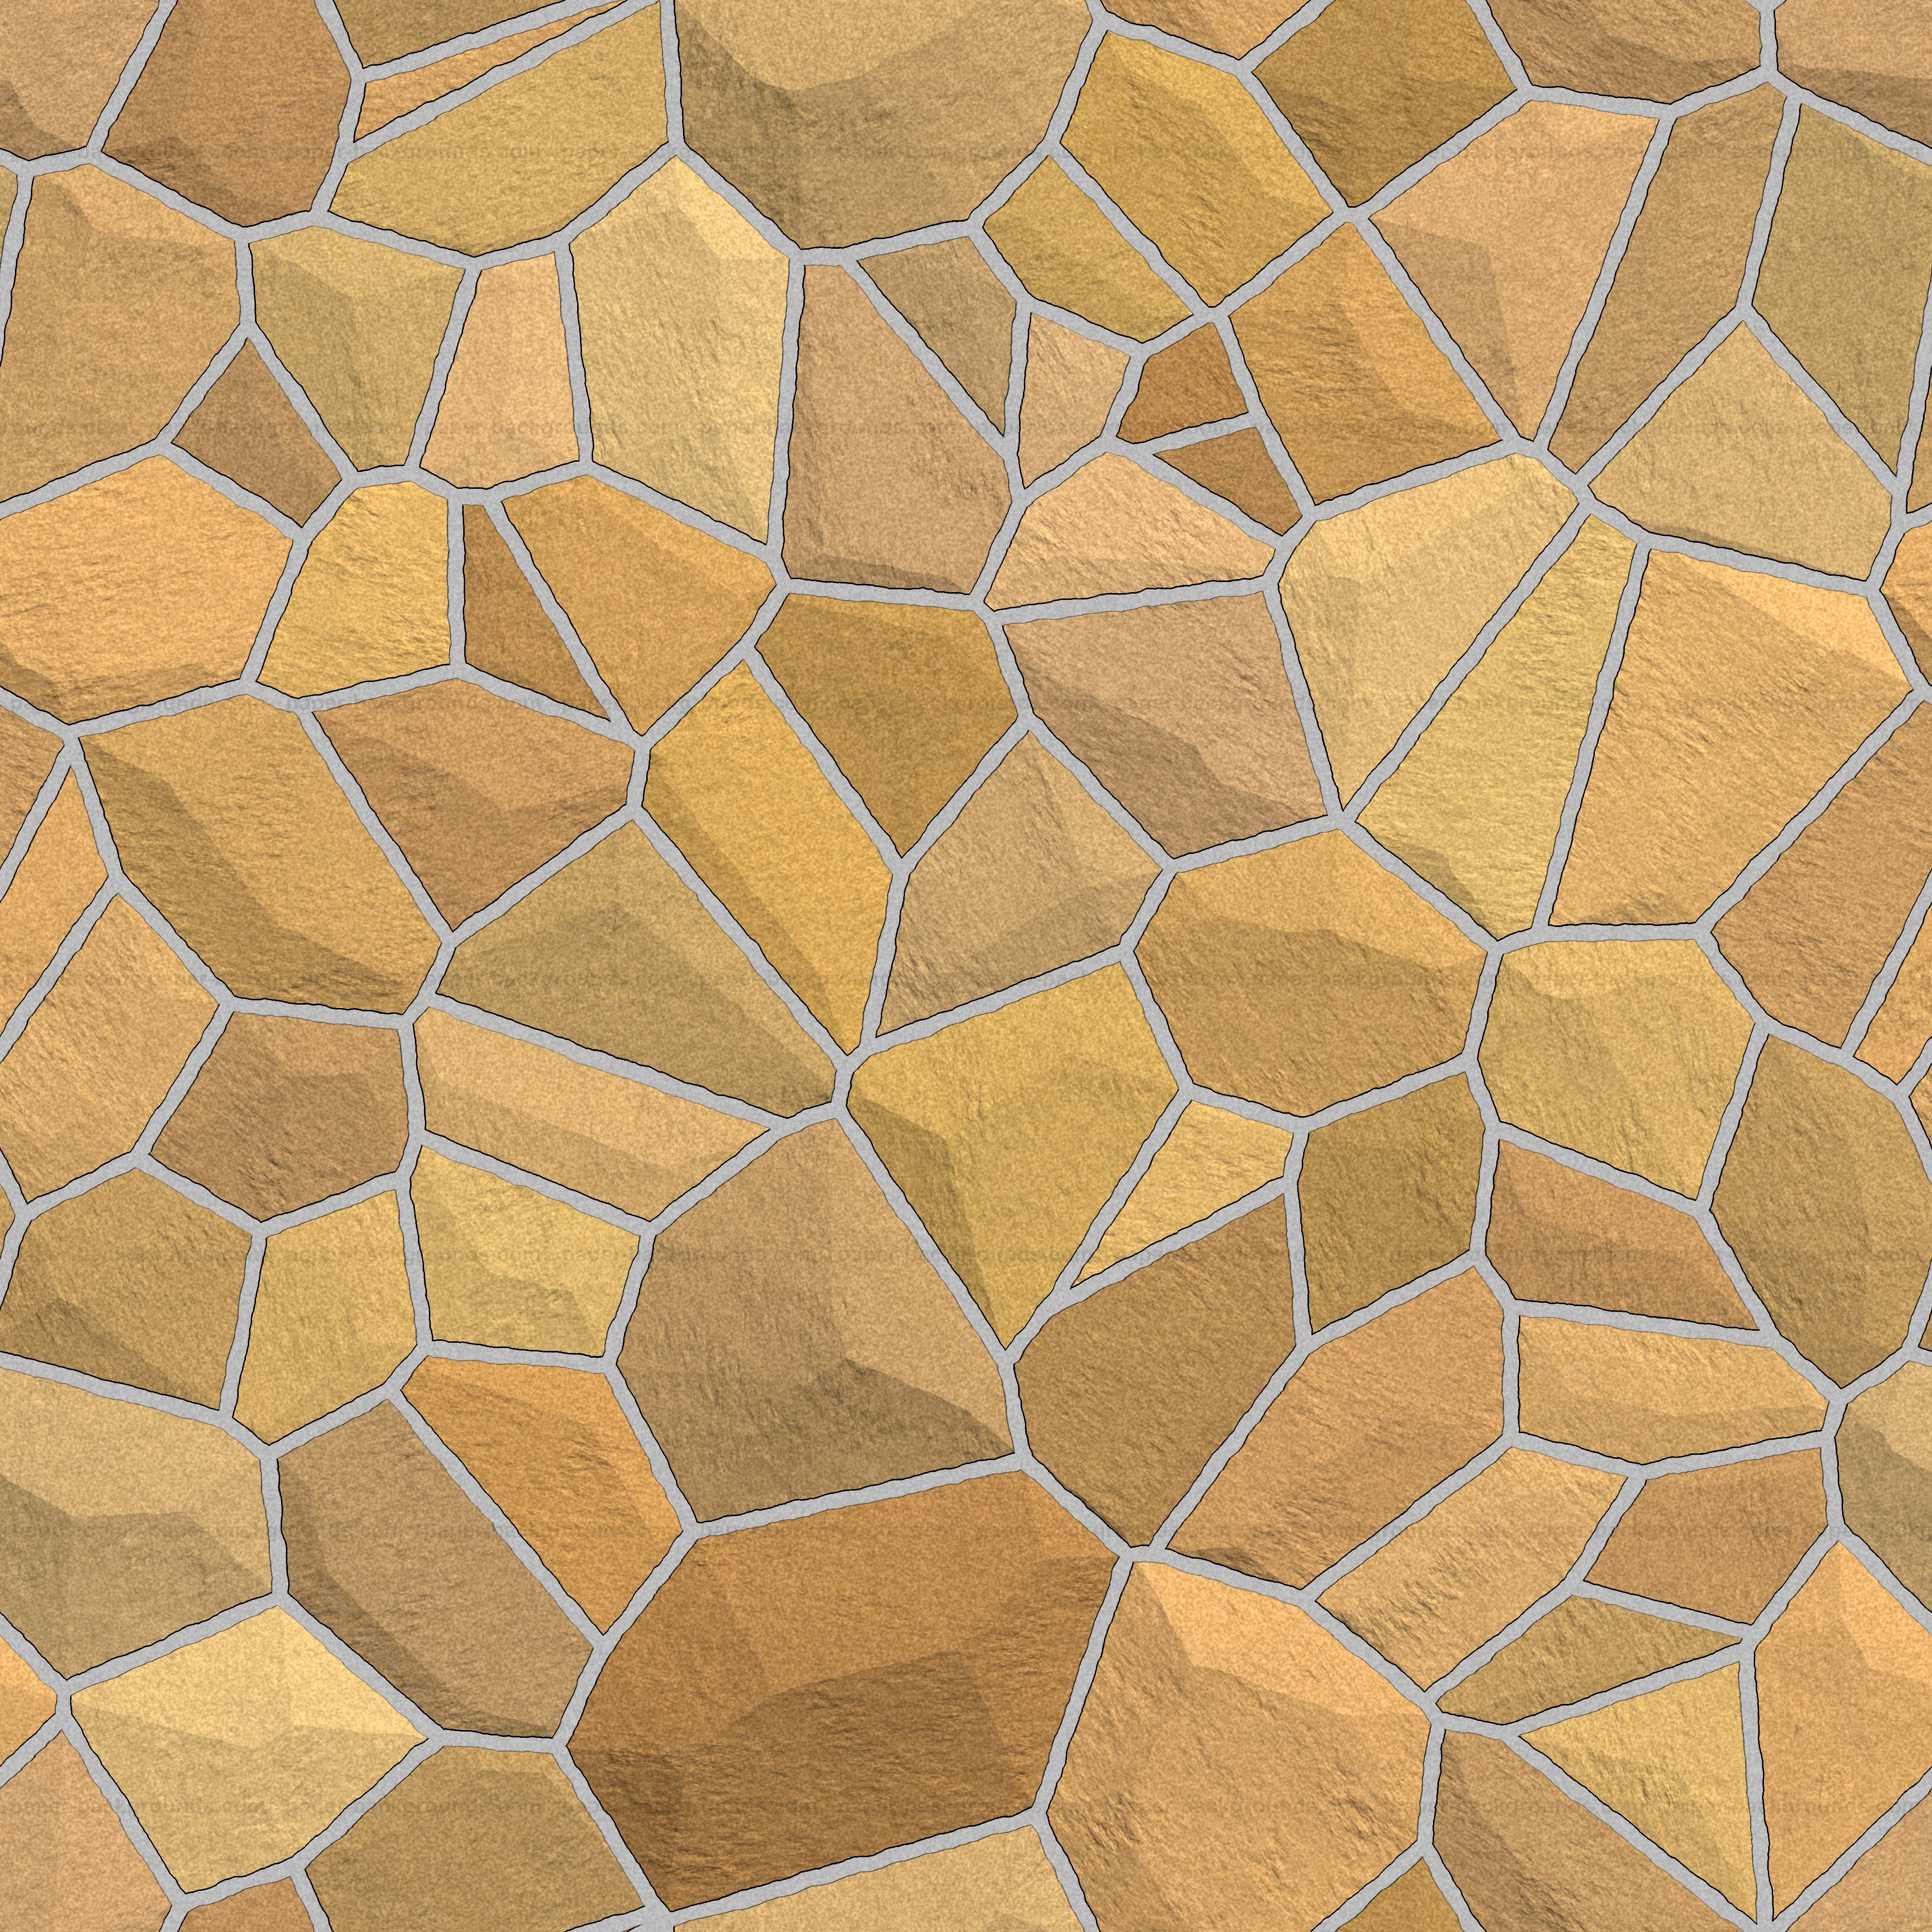 Free download 4000x4000 Pixel Wallpaper Seamless Yellow Brown Stone Wall Texture [4000x4000] for your Desktop, Mobile & Tablet. Explore 4000x4000 Resolution HD Wallpaper. Love HD Wallpaper High Resolution, High